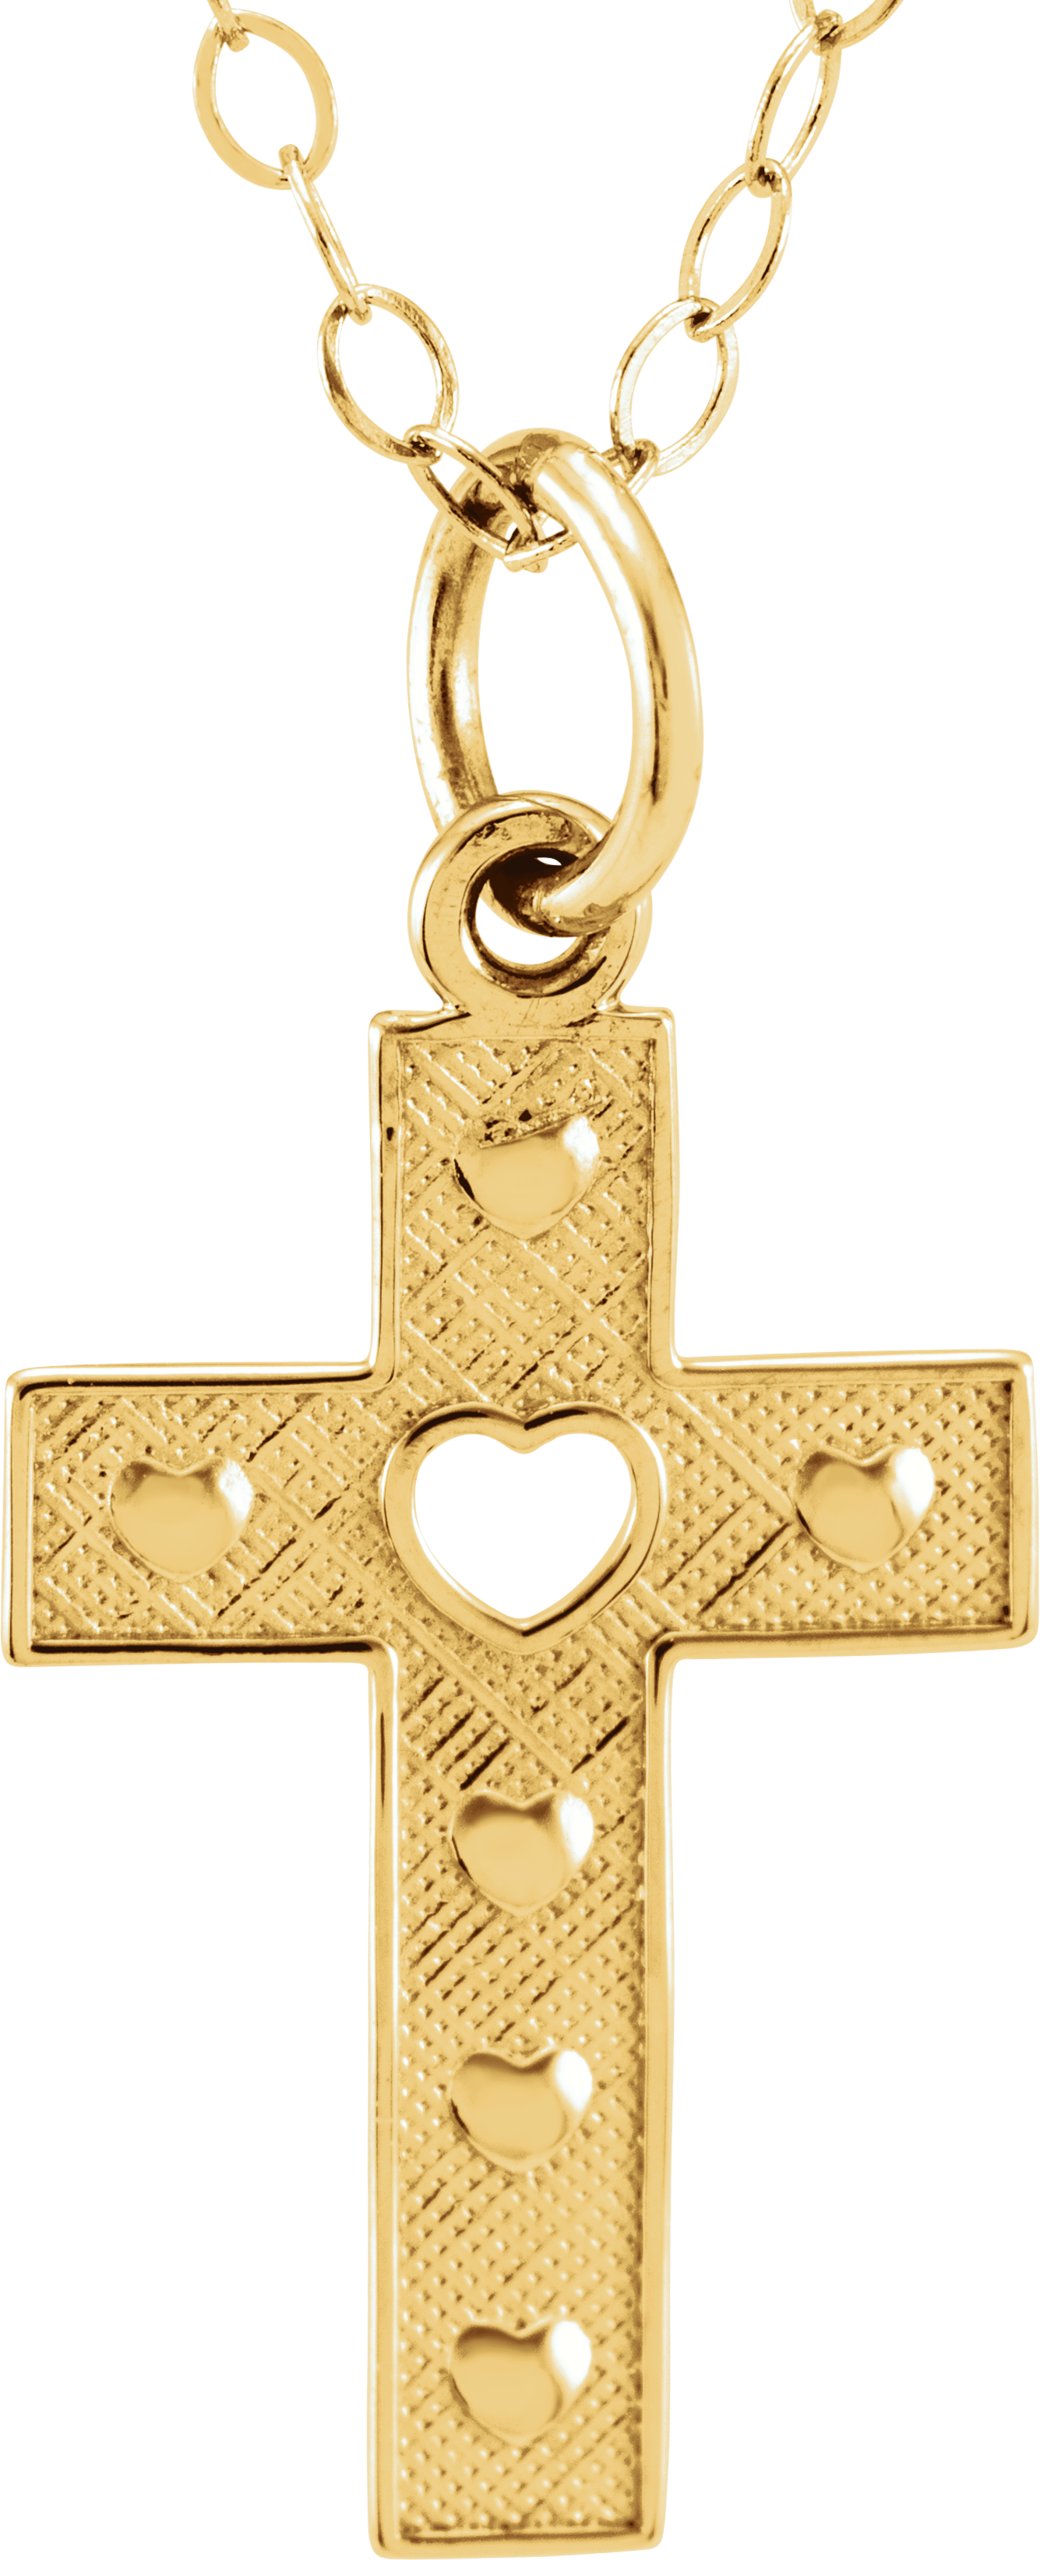 Childrens Cross with Heart Pendant 14.5 x 9mm Ref 620145